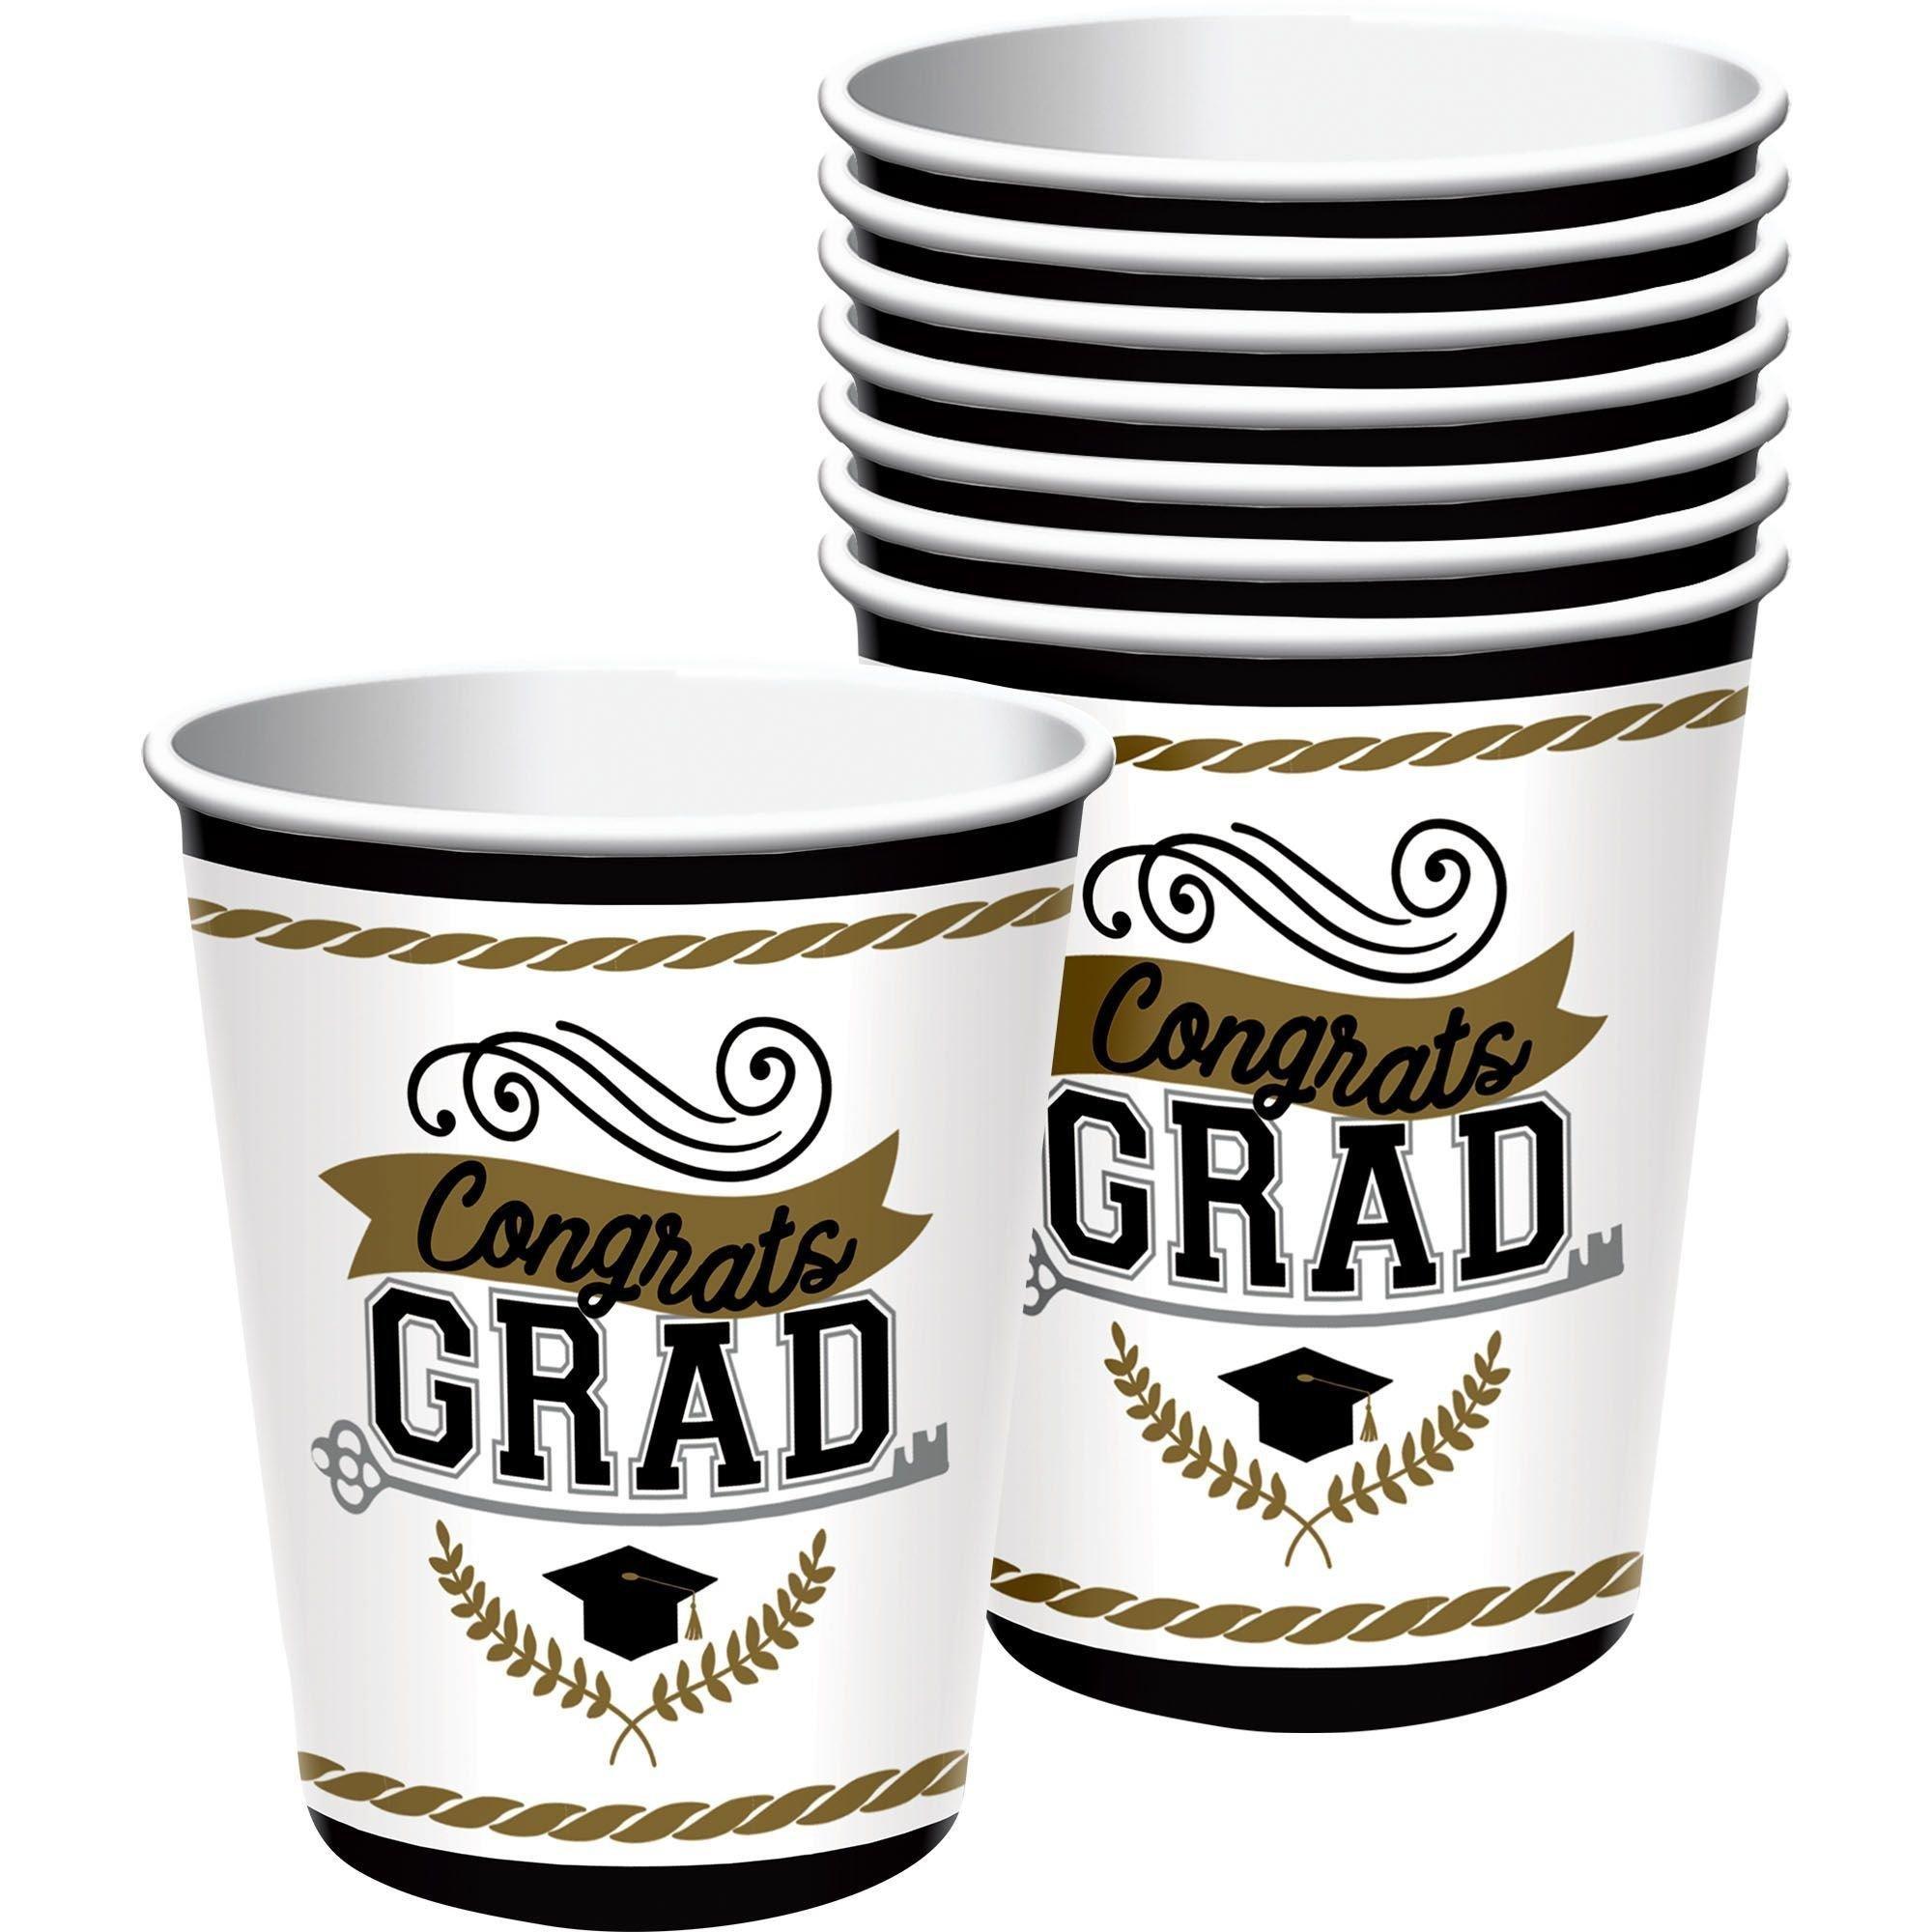 Graduation Party Supplies Kit for 30 with Decorations, Banners, Plates, Napkins, Cups - Nurses Call the Shots